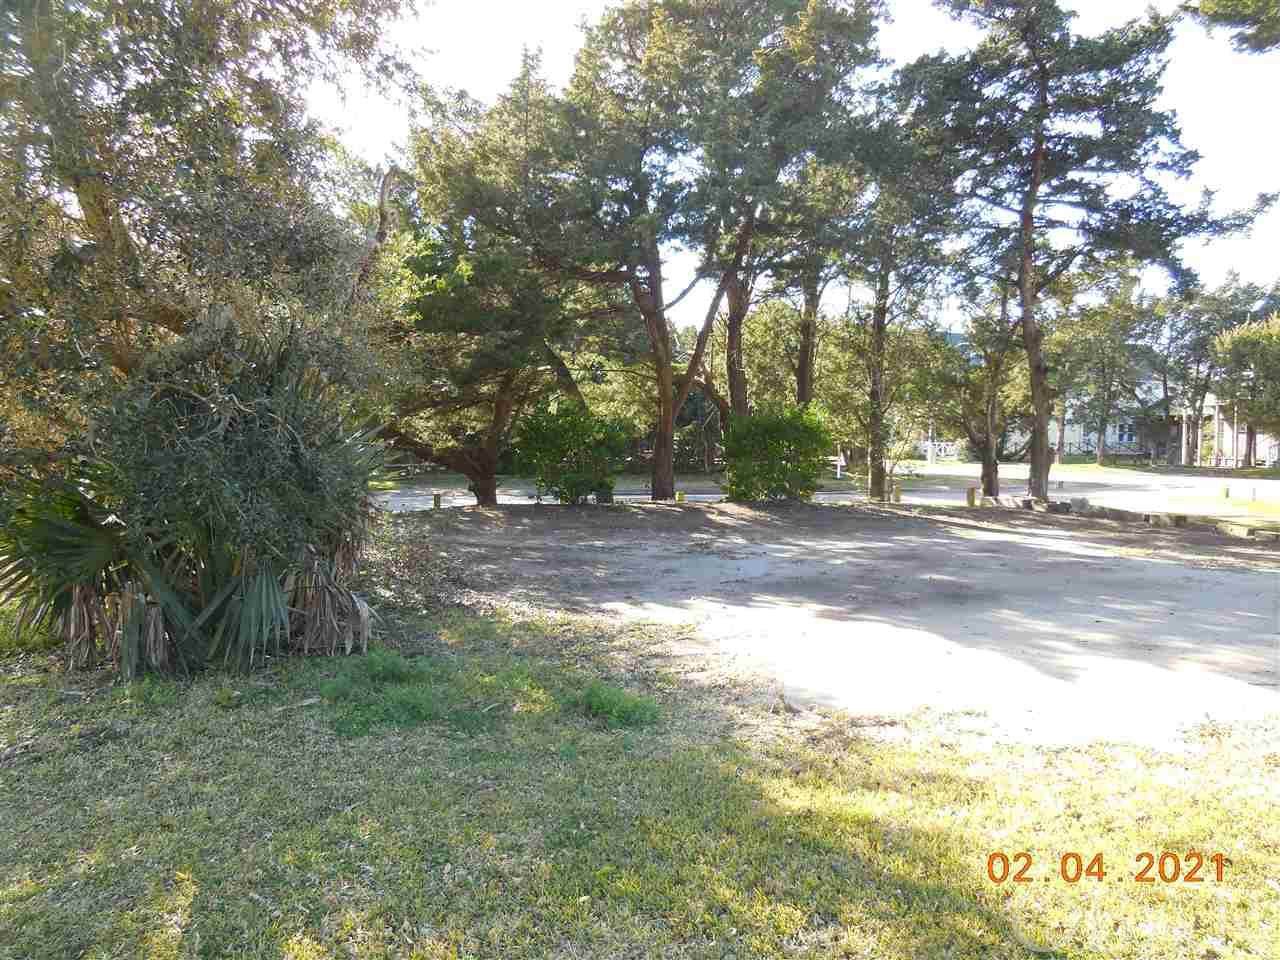 A beautiful lot on Old Beach Road! This property is a part of the new Live Oak Village subdivision. Lovely trees and native vegetation. Great location for walking or biking to island activities or hop on the tram to visit the island shops and restaurants. This property conveys with a 4 bedroom septic permit and a 3 bedroom/2 bath water meter. Restrictive covenants in place to retain the historic charm and quaintness of Ocracoke. Choose from several classic coastal home designs! Taxes are an estimate only. Currently being taxed as one large parcel.